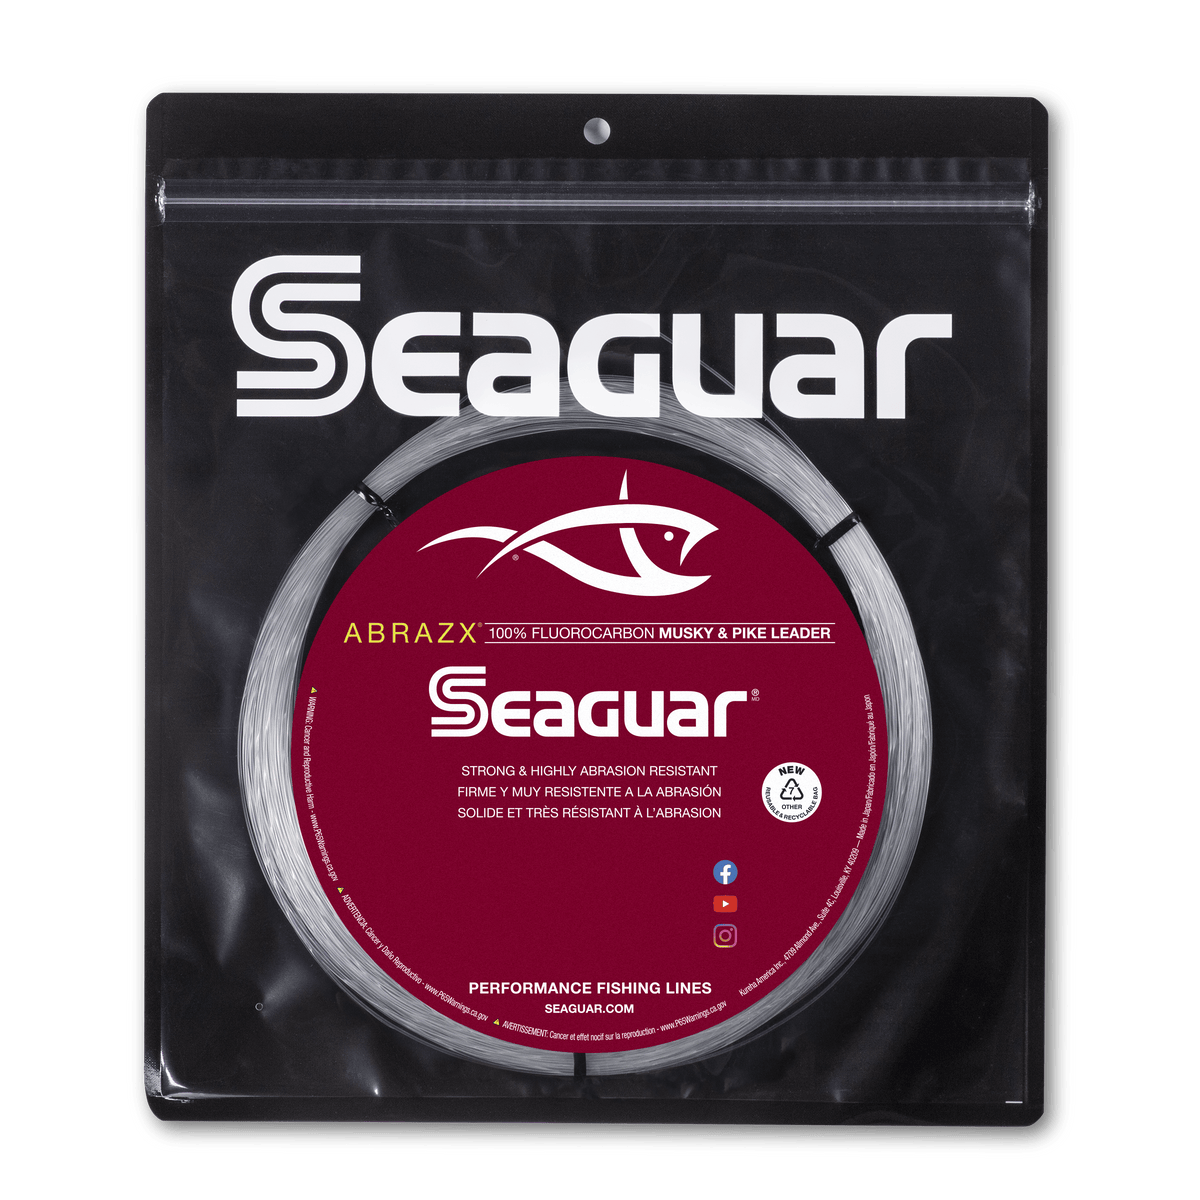 AbrazX Fluorocarbon Musky & Pike Leader l Freshwater l Seaguar